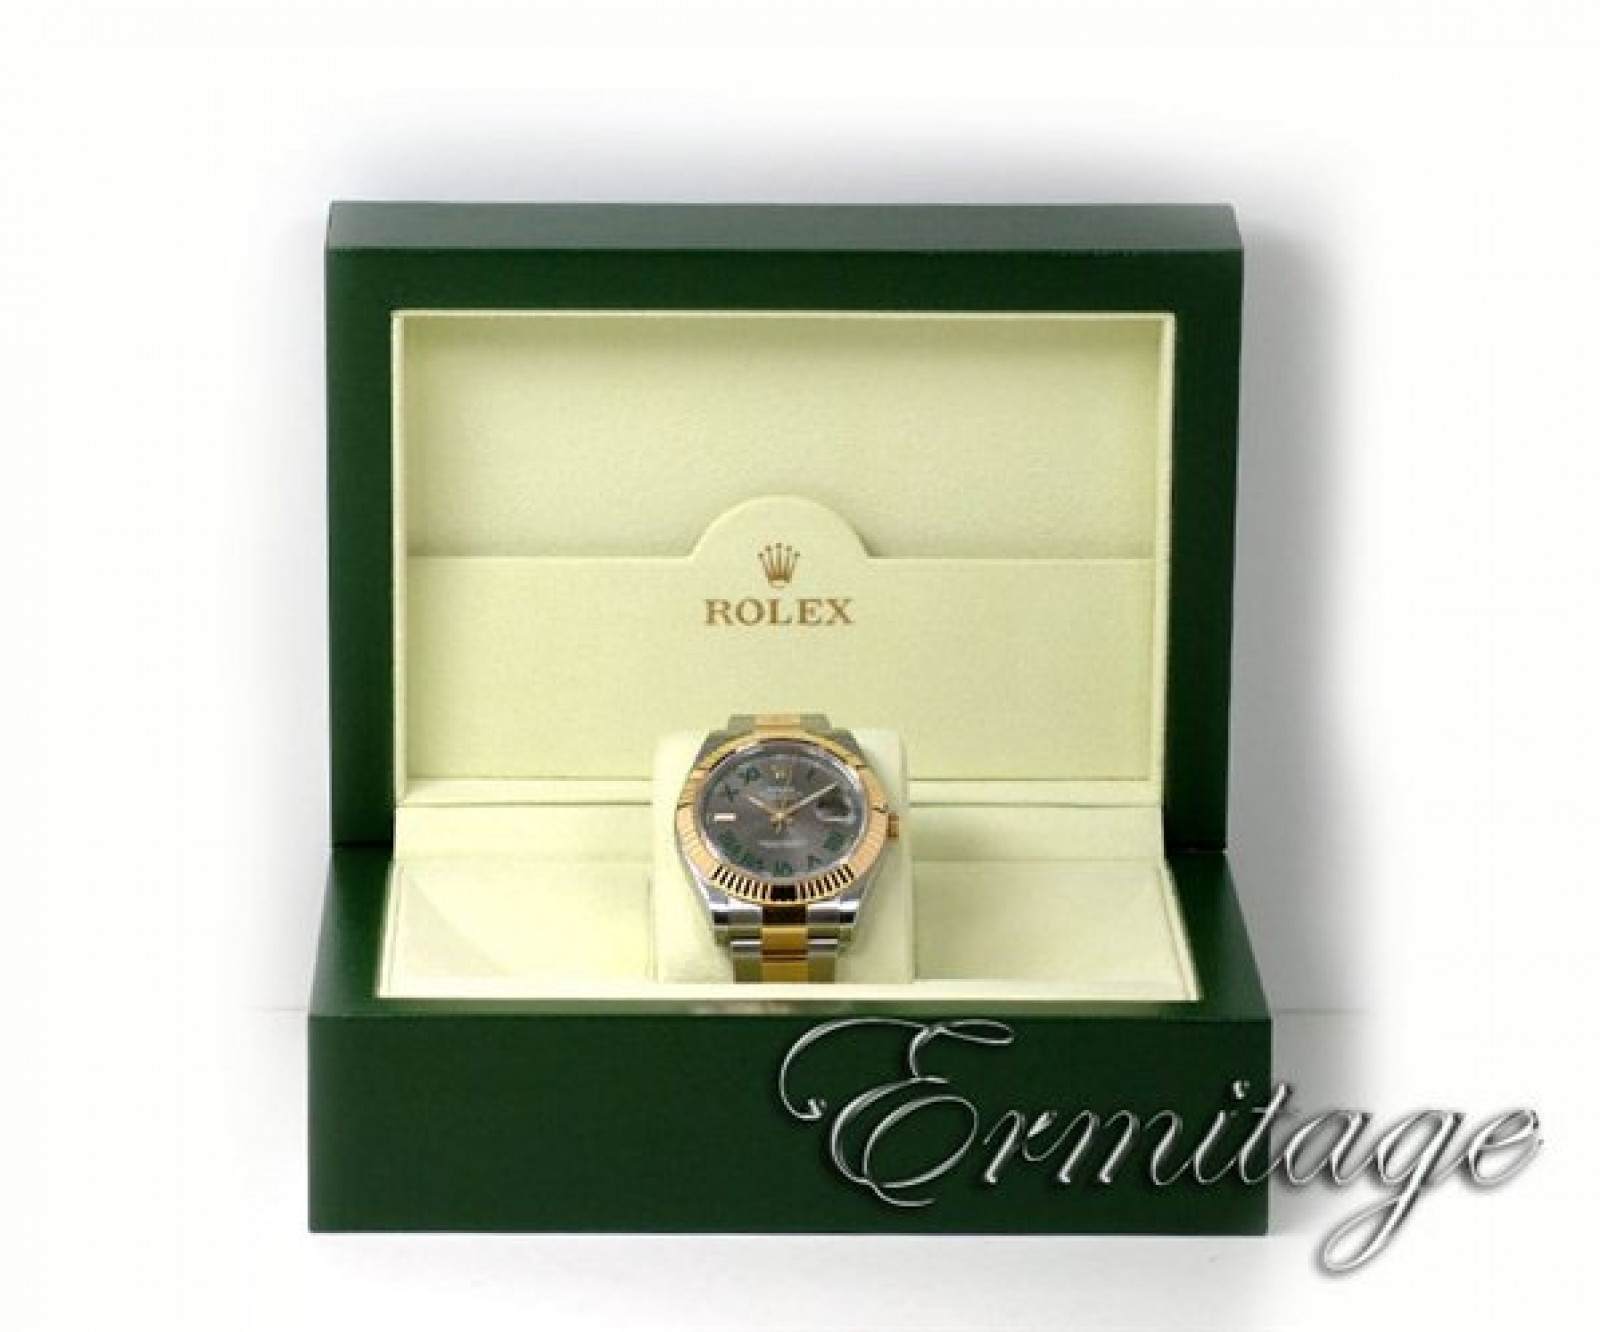 Rolex Datejust II 116333 Gold & Steel with Slate Dial